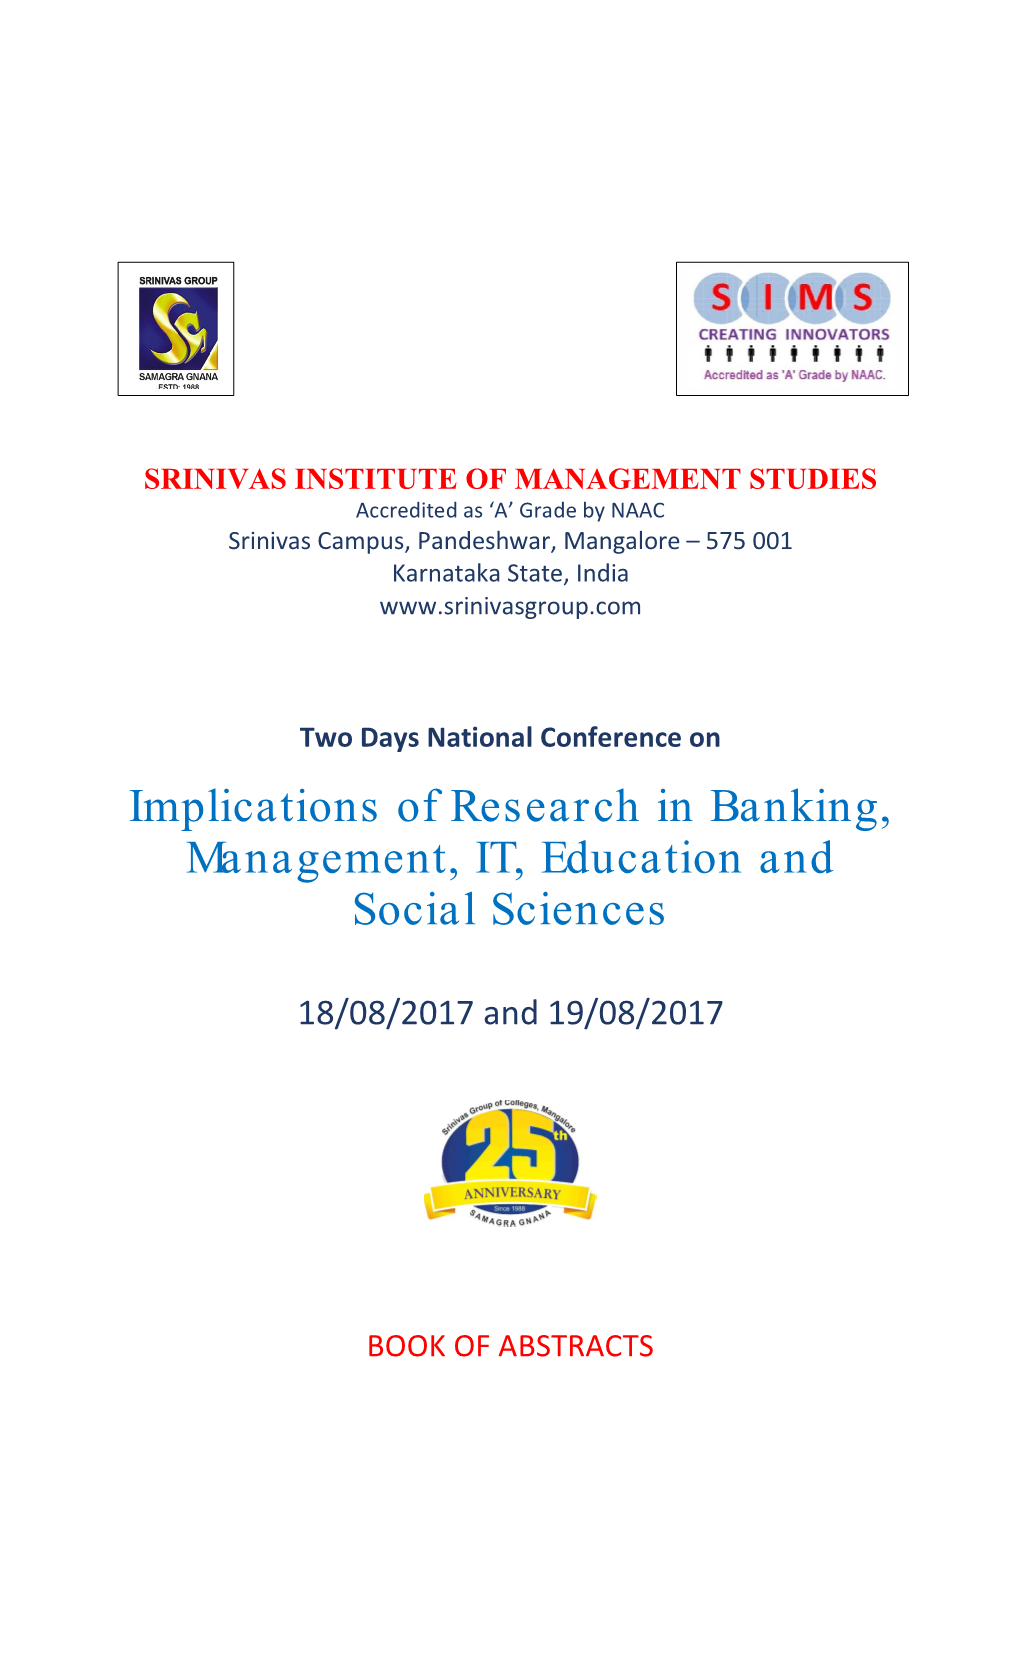 Implications of Research in Banking, Management, IT, Education and Social Sciences